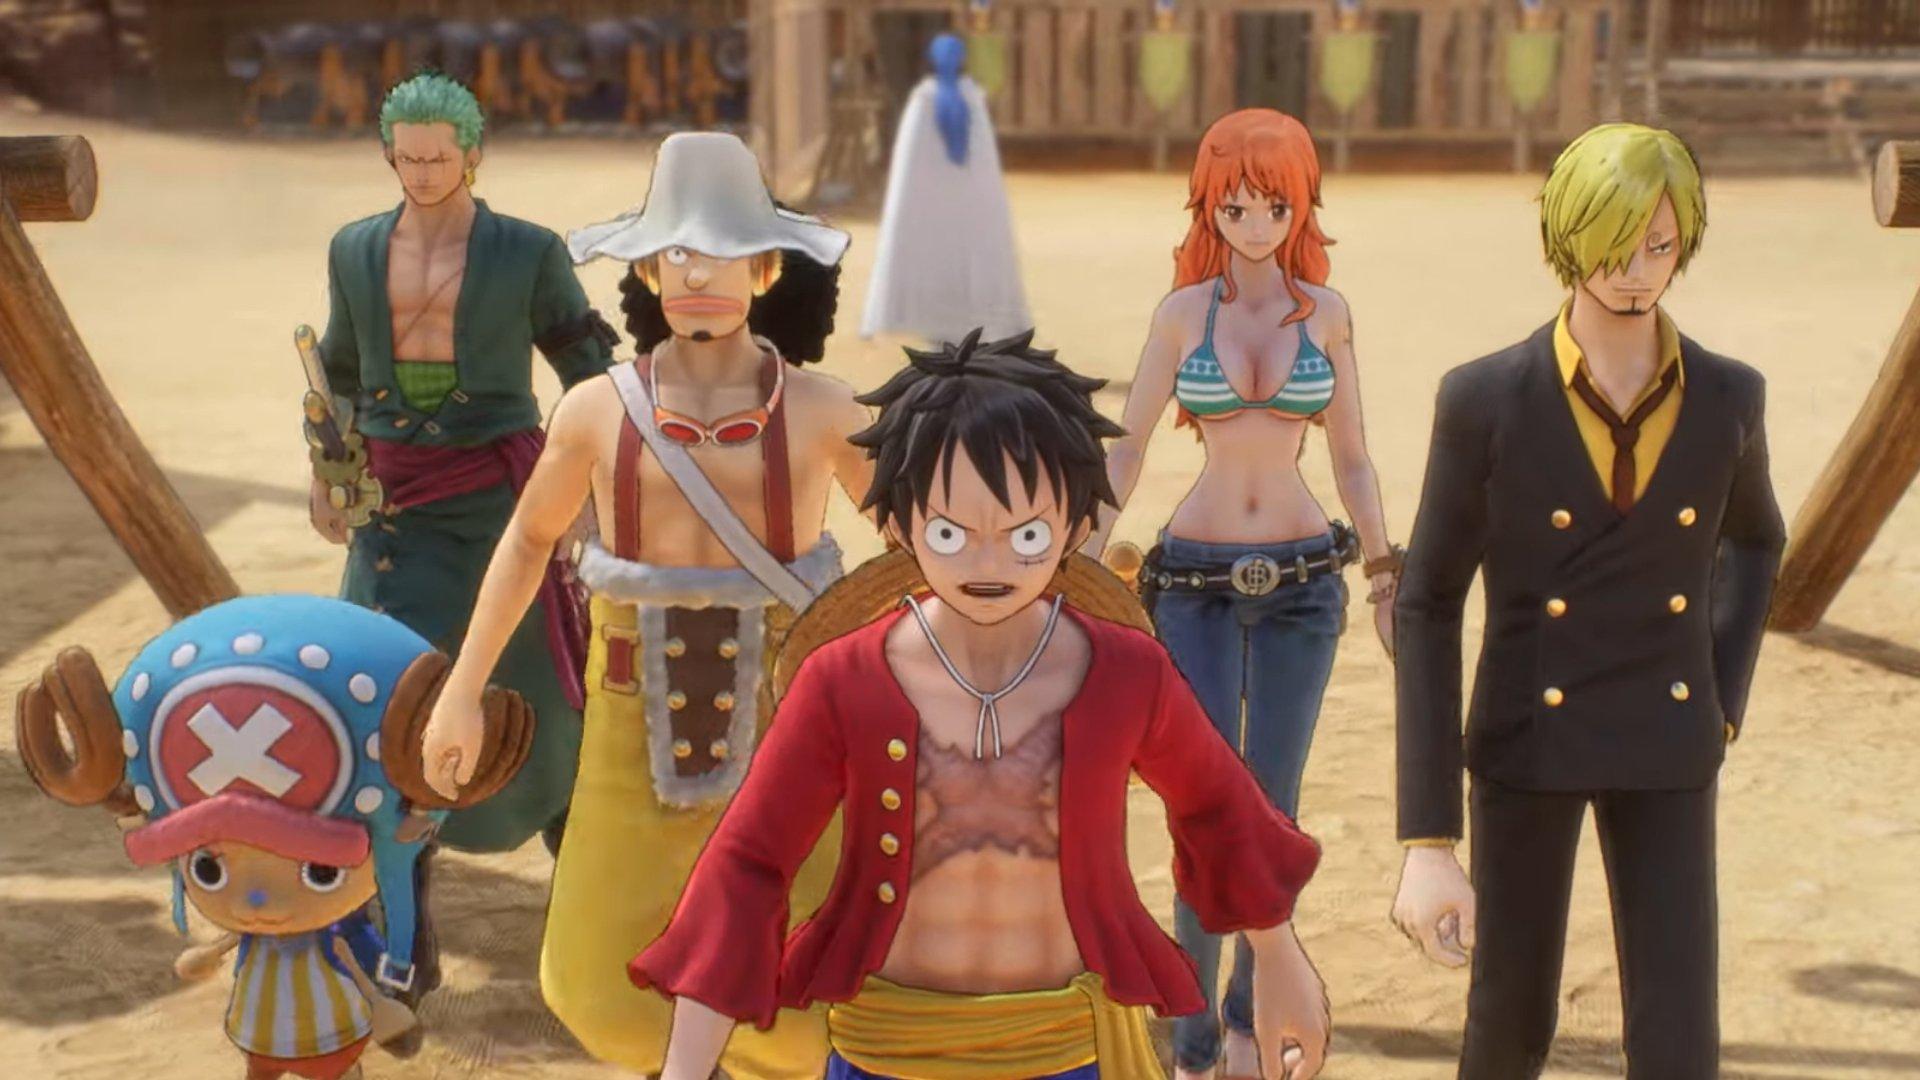 One Piece Online - MMO Square